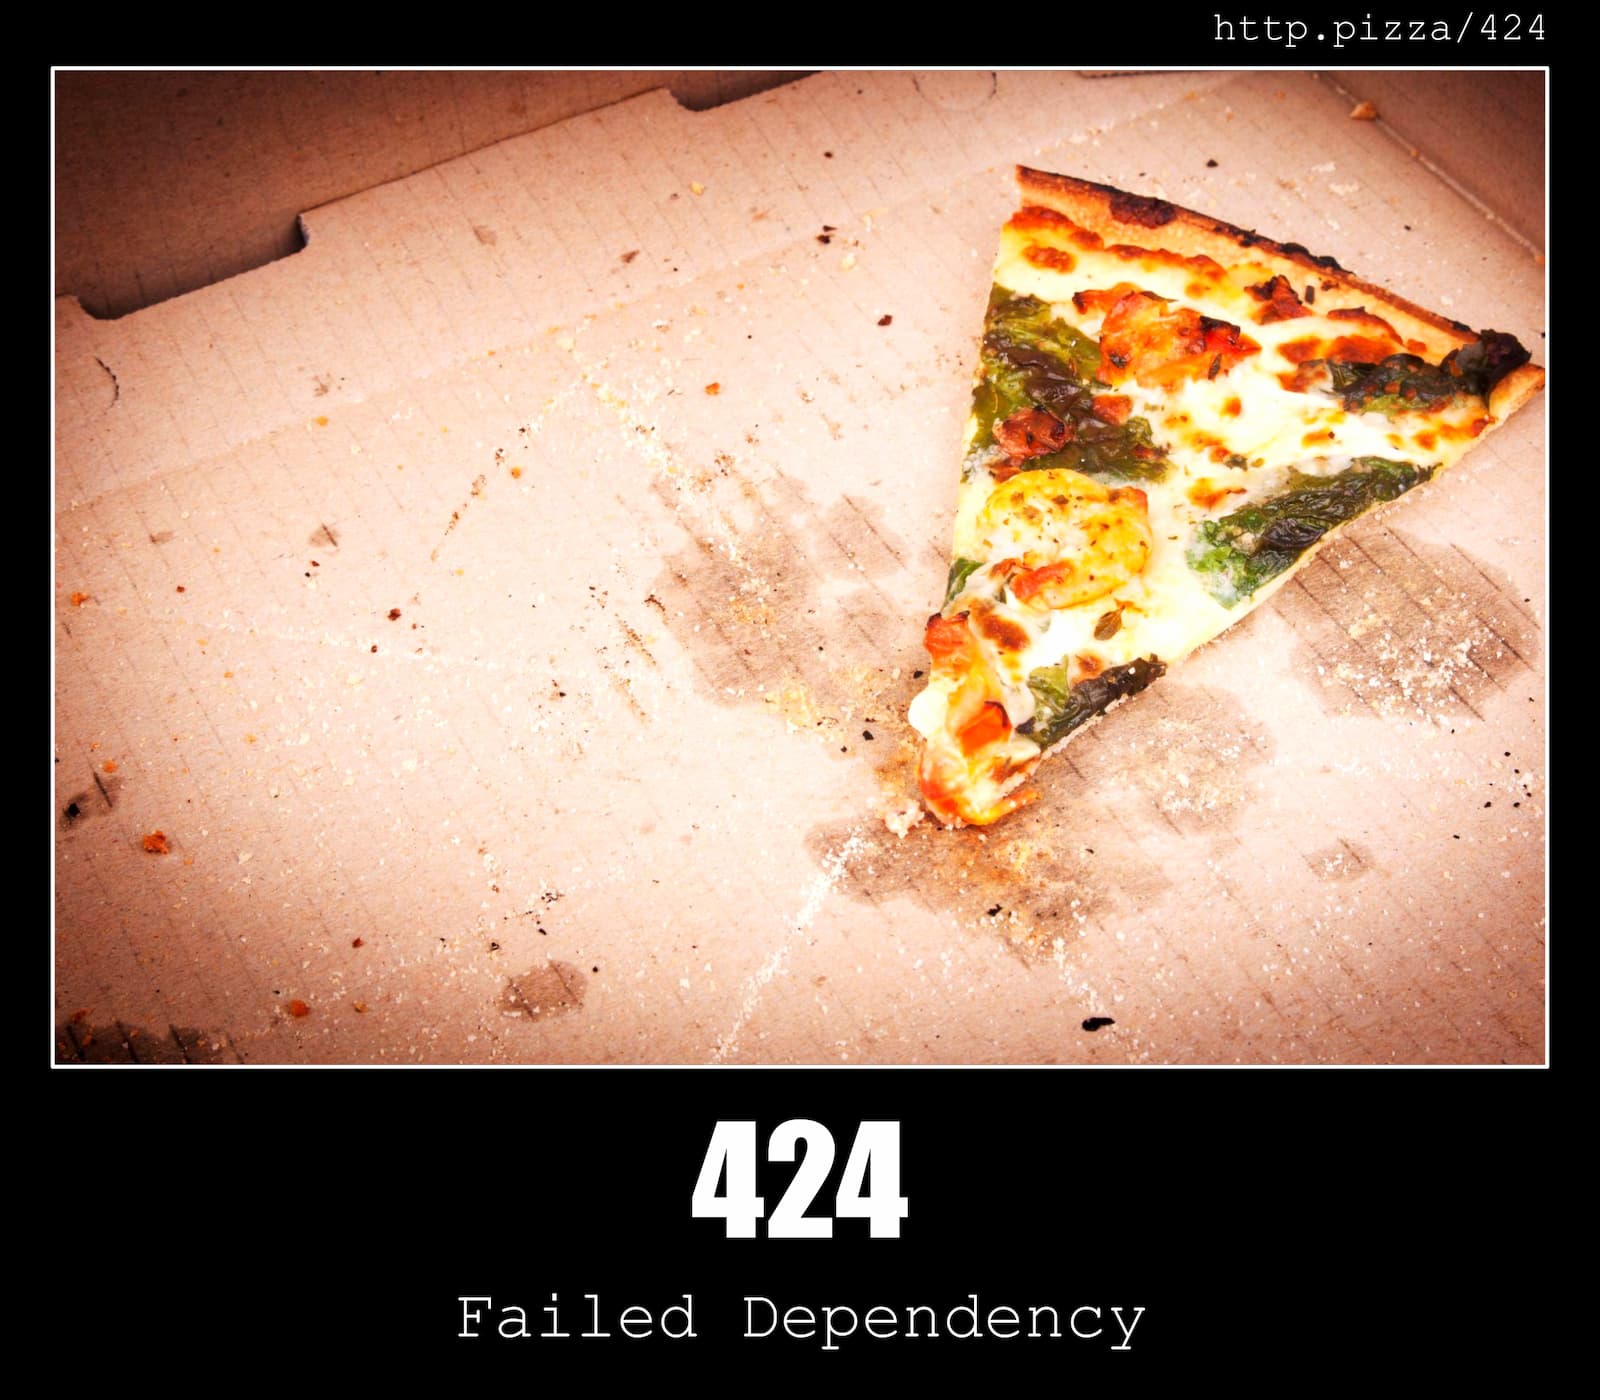 HTTP Status Code 424 Failed Dependency & Pizzas